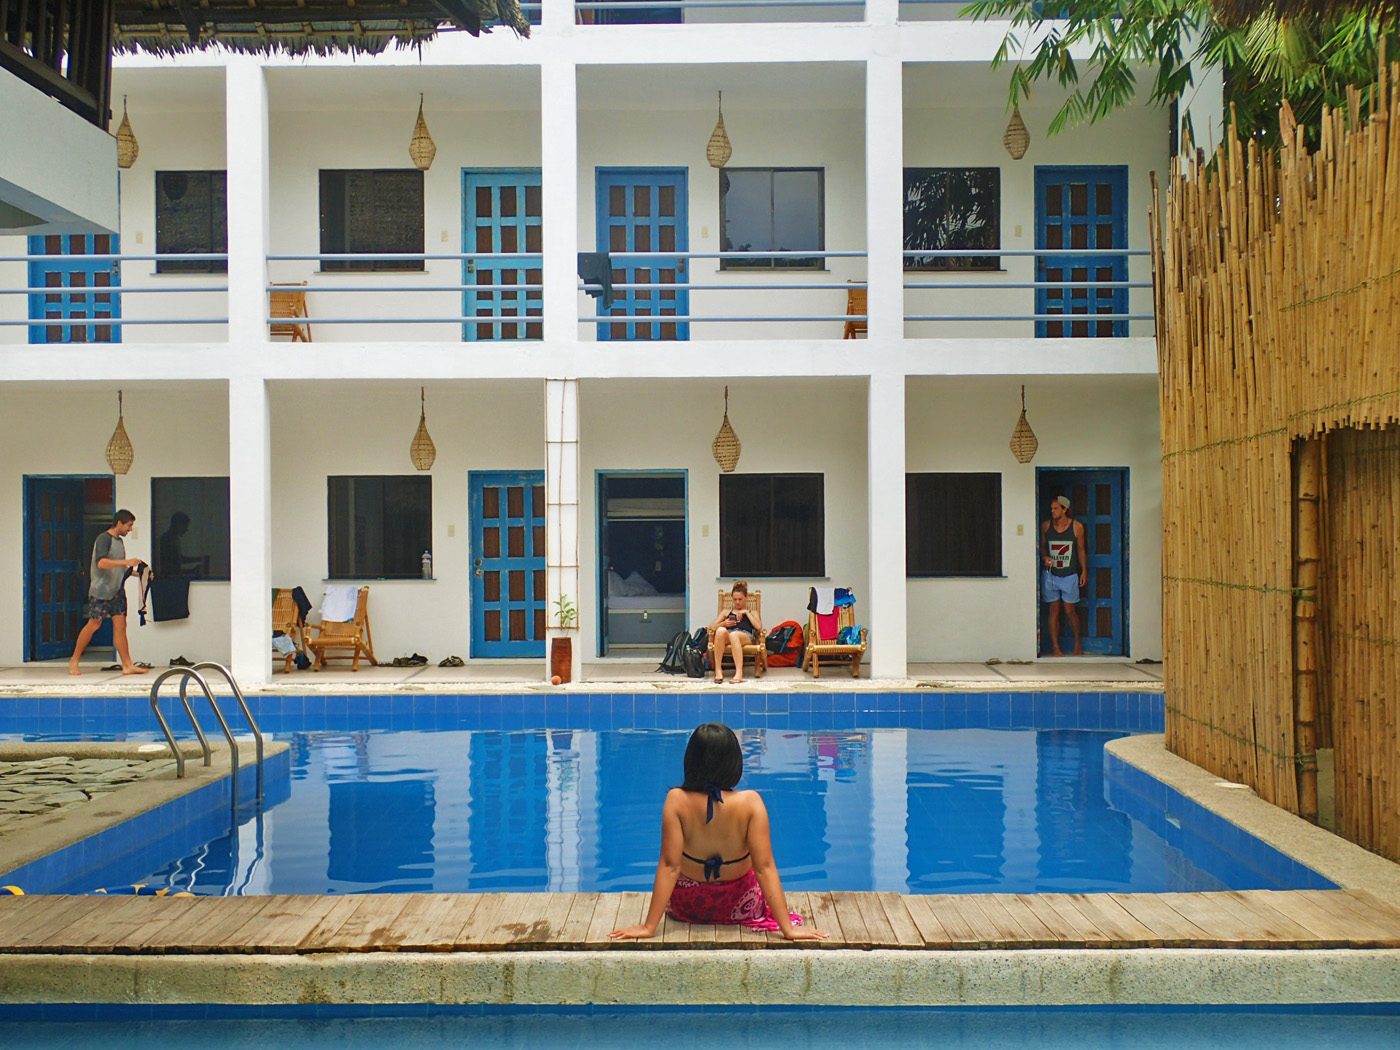 PARTY HOSTEL. Known for parties and a big pool for chilling, Mad Monkey Hostel also initiates community programs. 